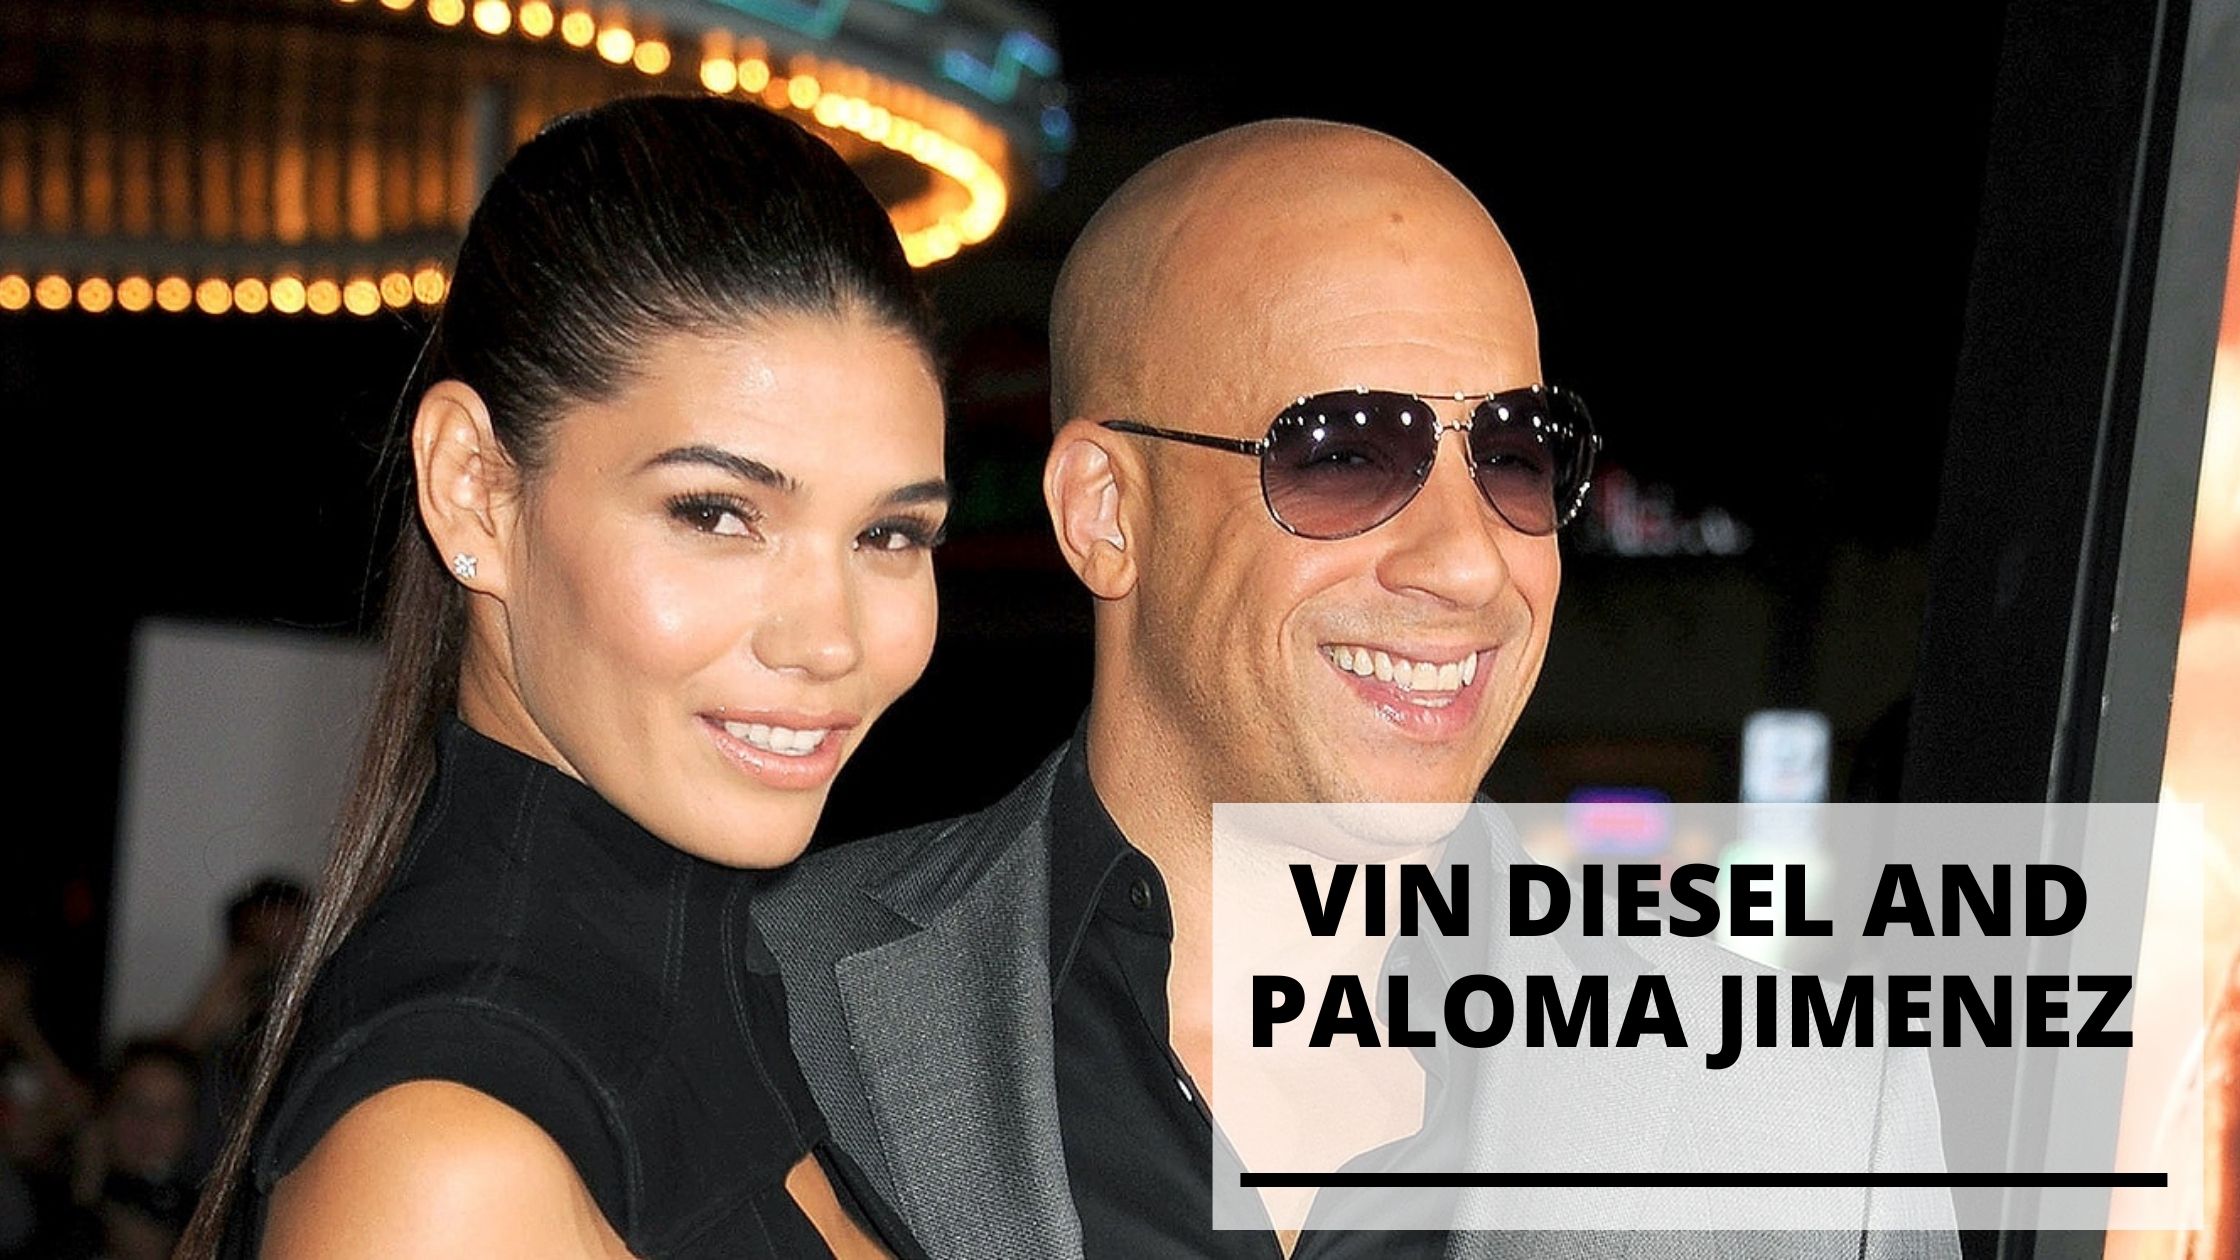 Info & Pics of Vin Diesel with His Partner and Children